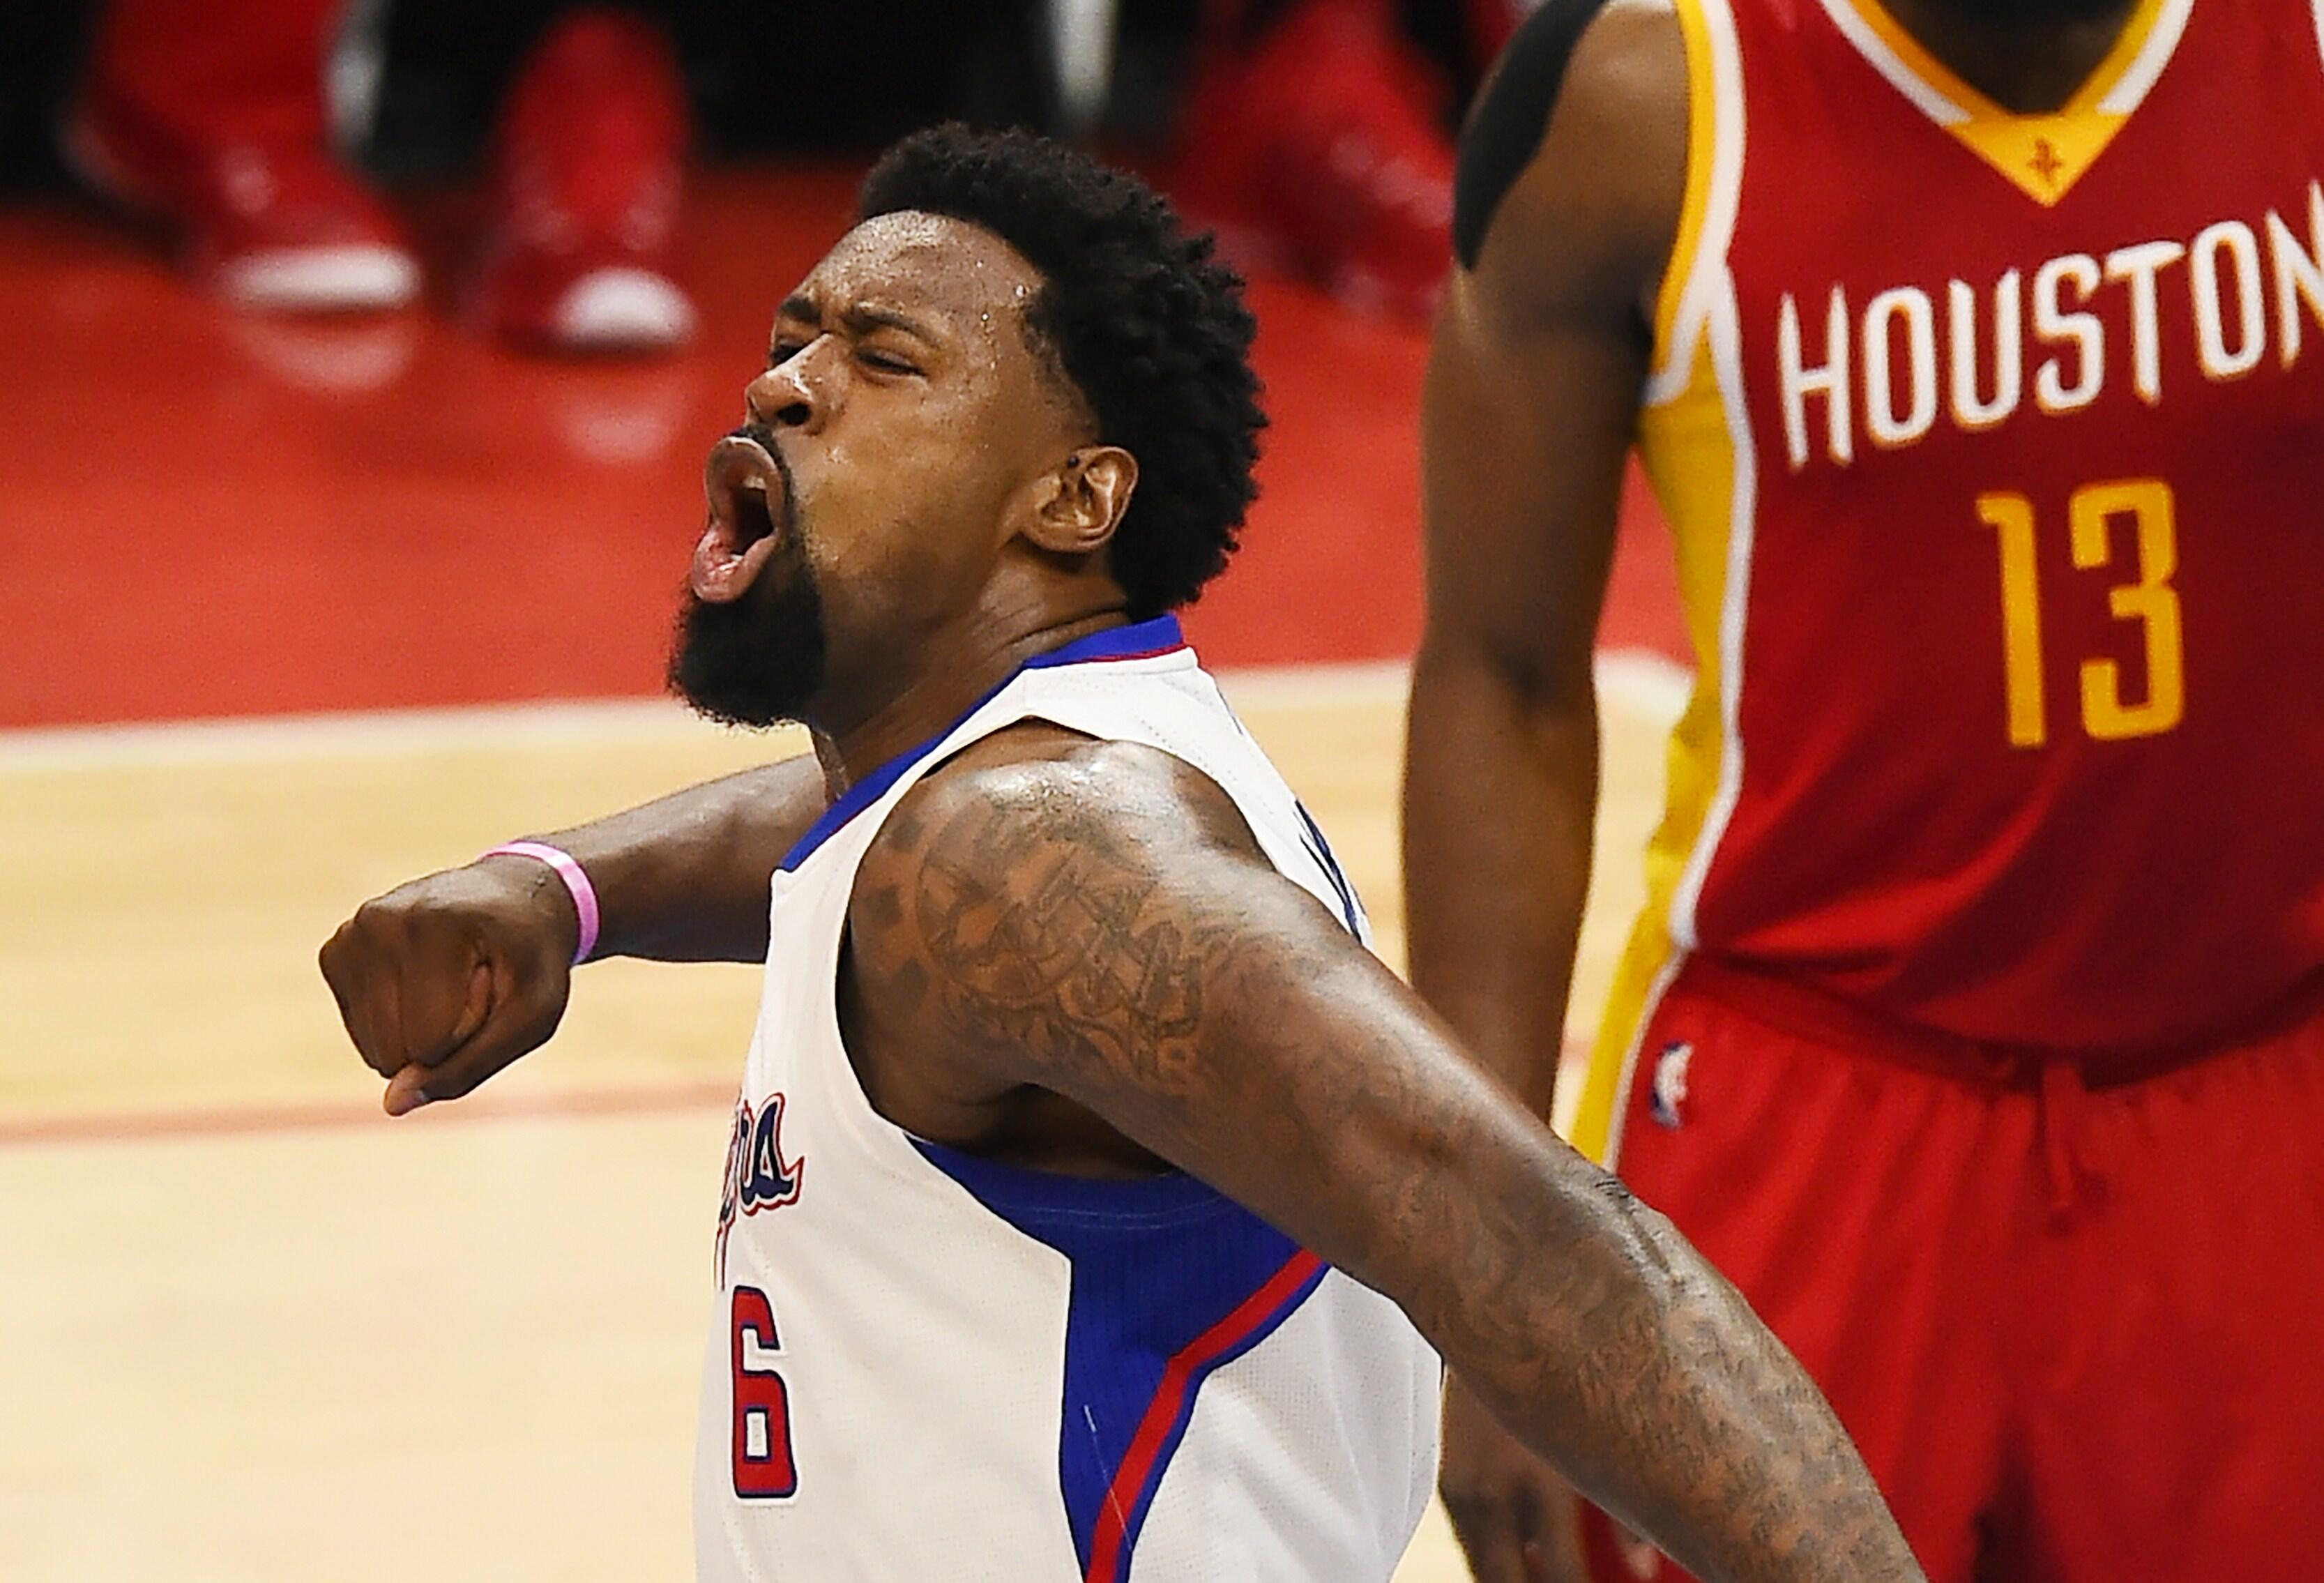 Los Angeles Clippers DeAndre Jordan reacts during NBA playoff Game Four against the Houston Rockets, May 10, 2015 at Staples Center in Los Angeles, California. The Clippers defeated the Rockets 128-95 to lead the series 3-1.   AFP PHOTO / ROBYN BECK      